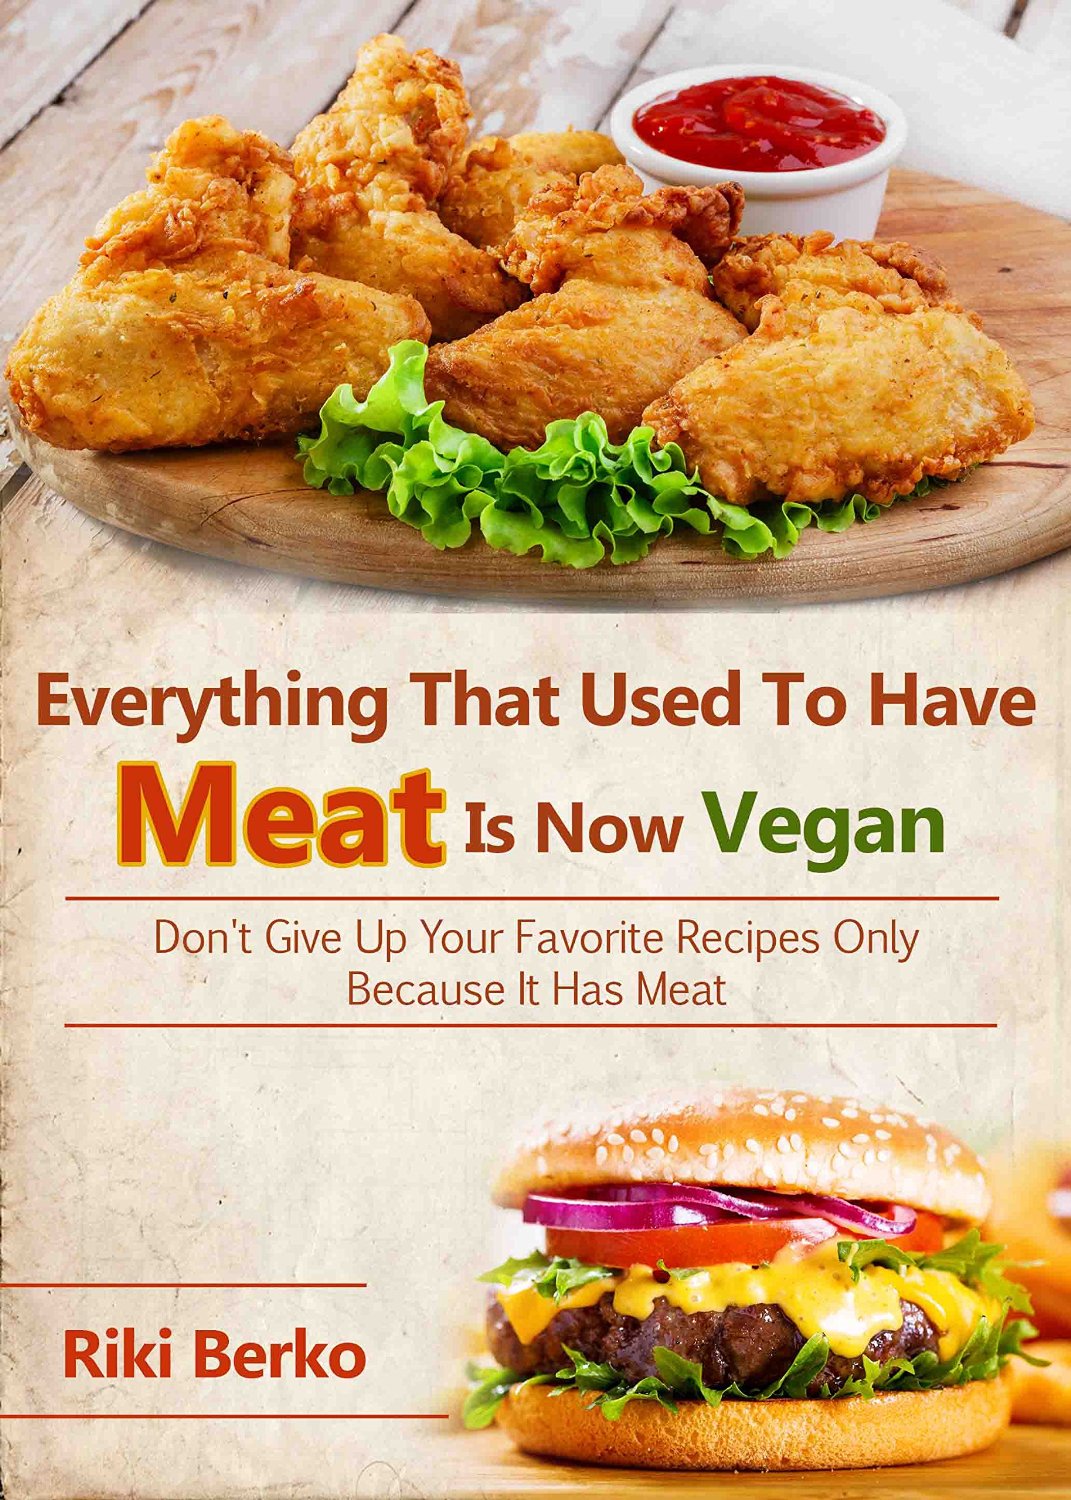 Everything That Used To Have Meat, Is Now Vegan: Don’t Give Up Your Favorite Recipes Only Because It Has Meat by Riki Berko